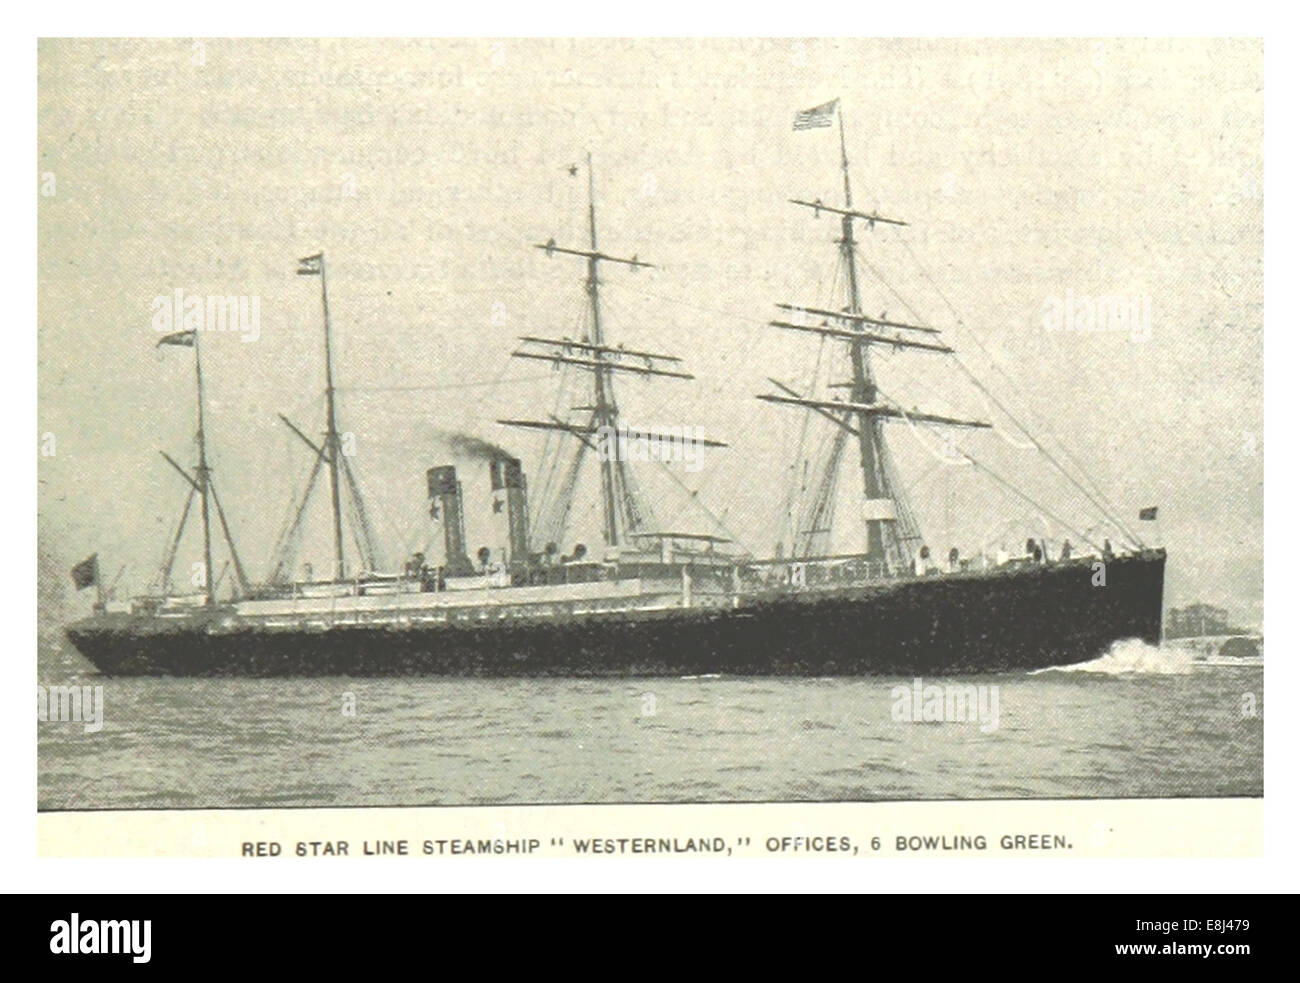 (Re1893NYC) PG095 RED STAR LINE STEAMSHIP WESTERNLAND Foto Stock